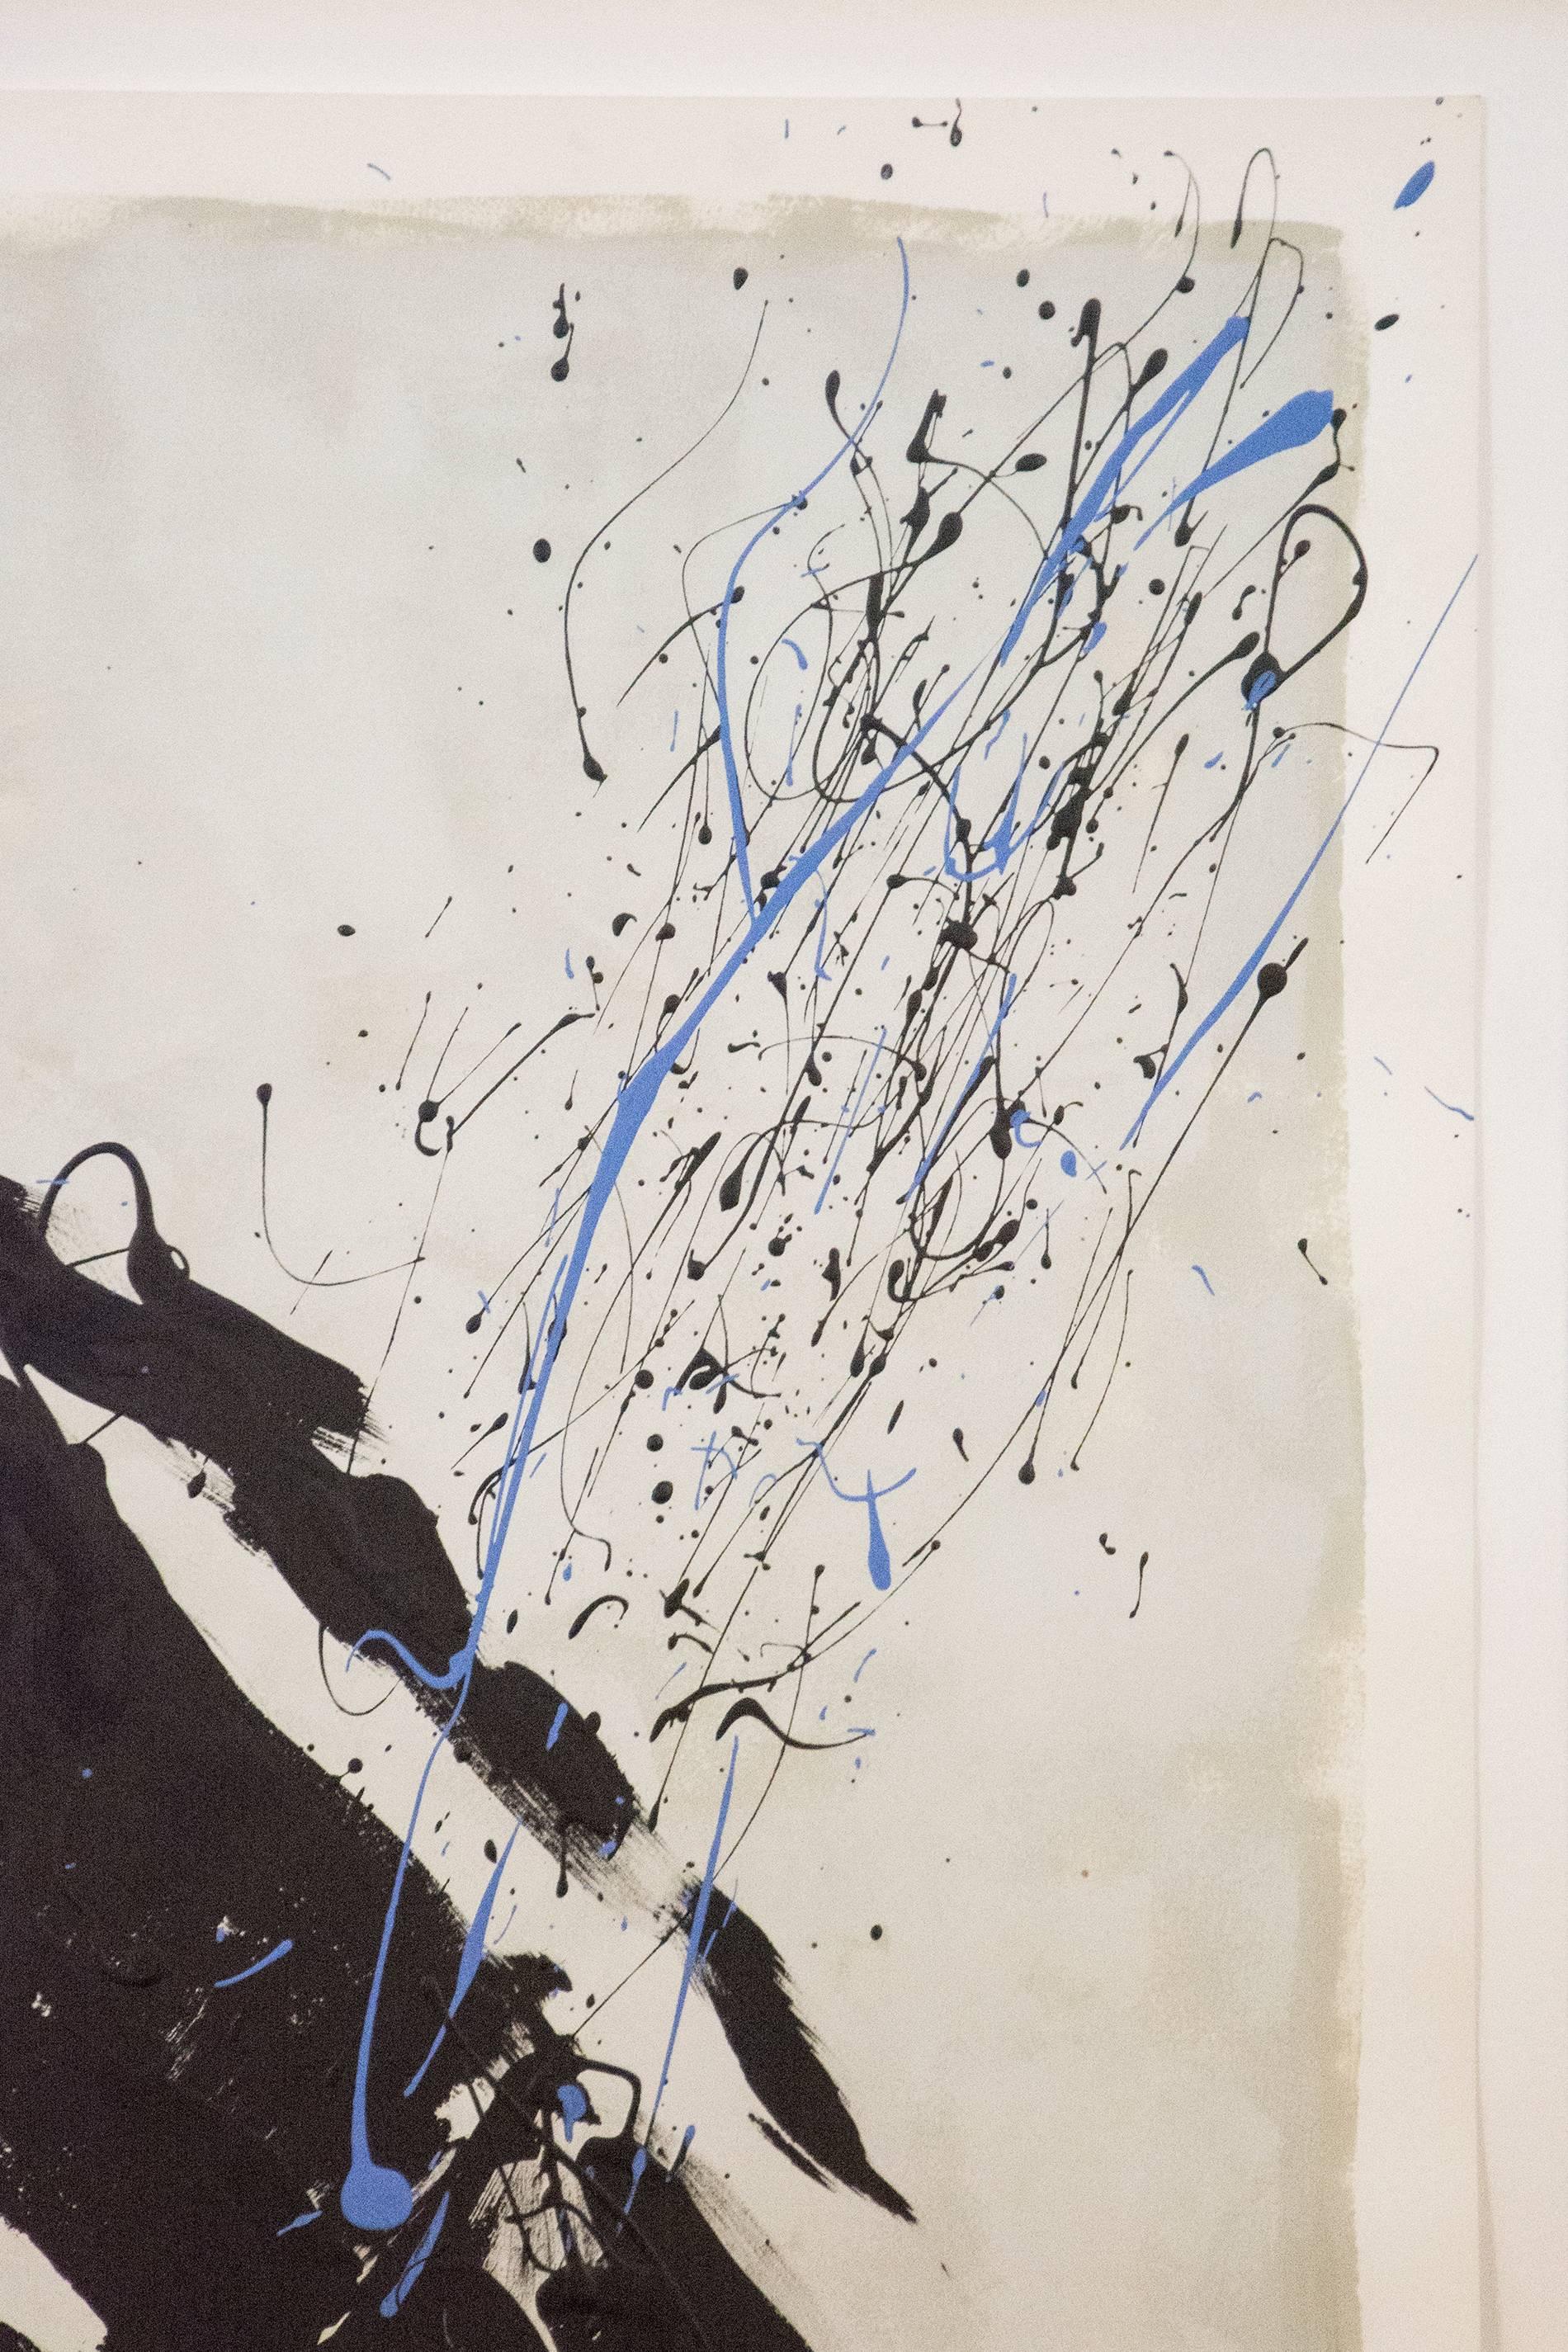 Rising above a strip of inky black, a black rag doll figure rendered in calligraphic brushstrokes meets three curved lines resembling waves in this painting on paper. A spray of light blue latex and black ink across the composition completes this